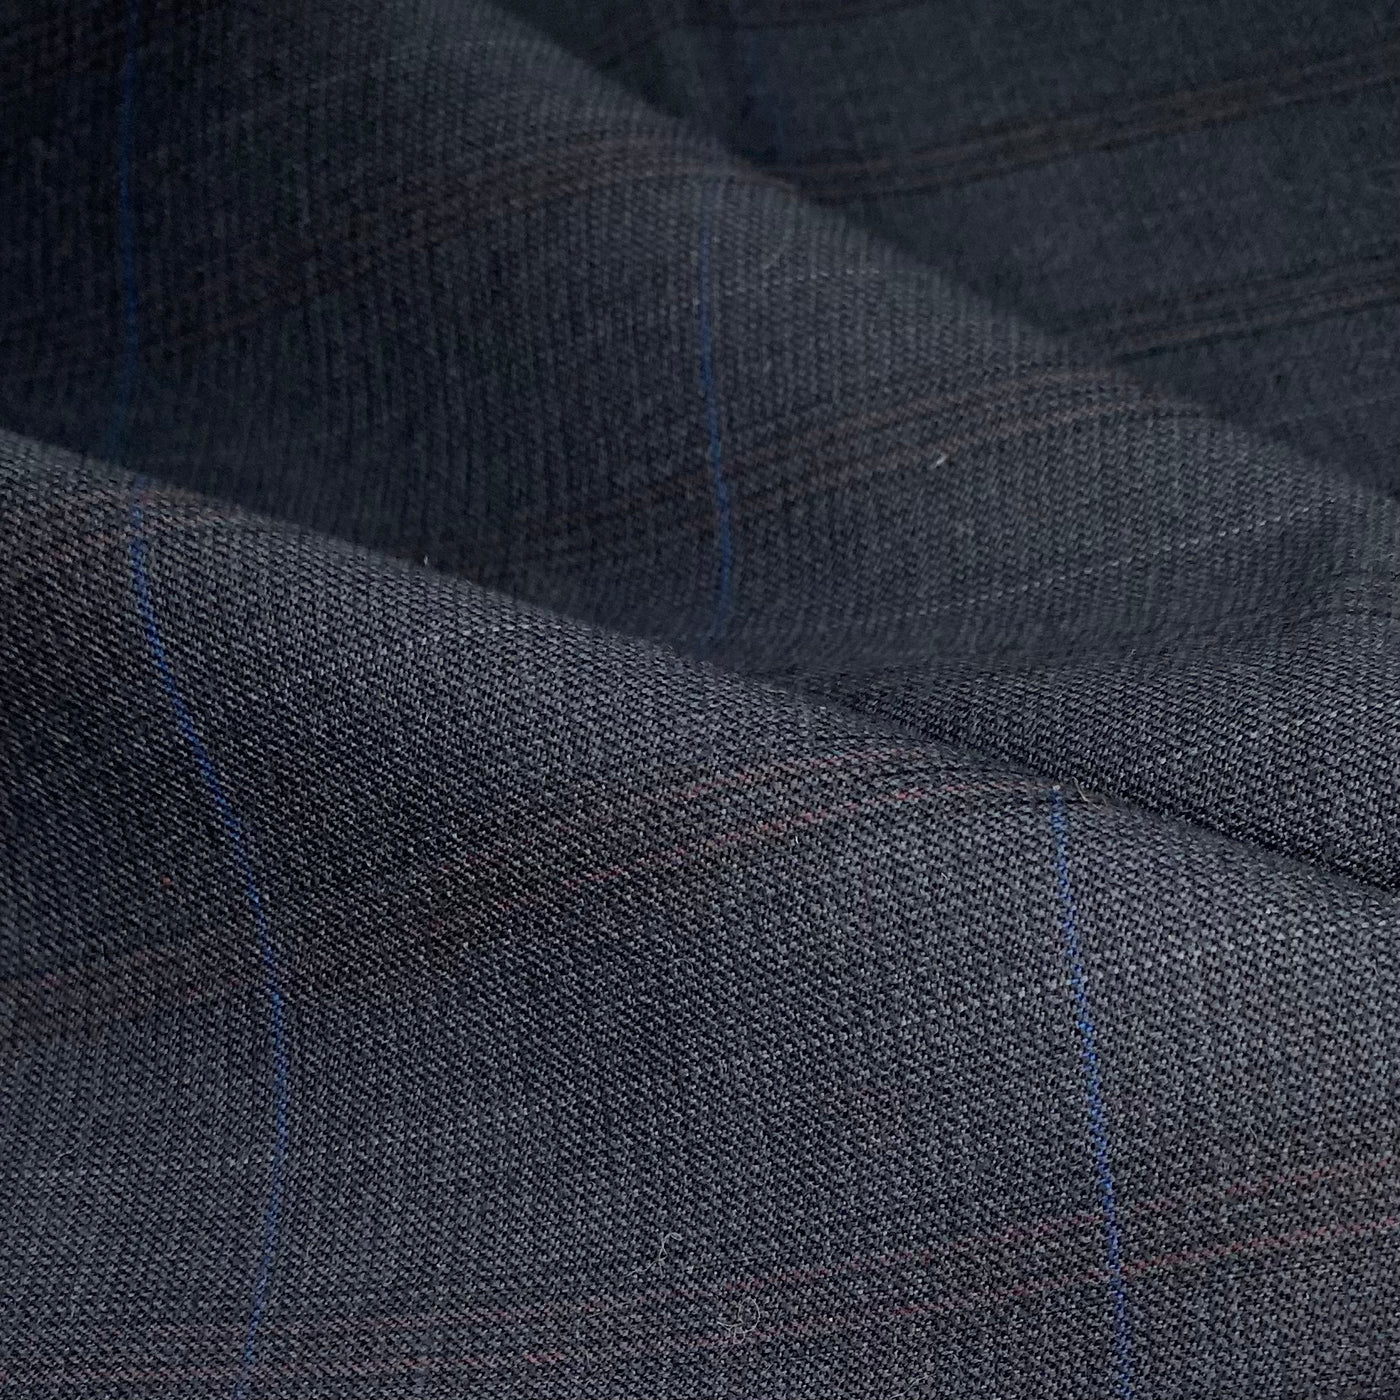 Plaid Wool Suiting - Grey/Blue